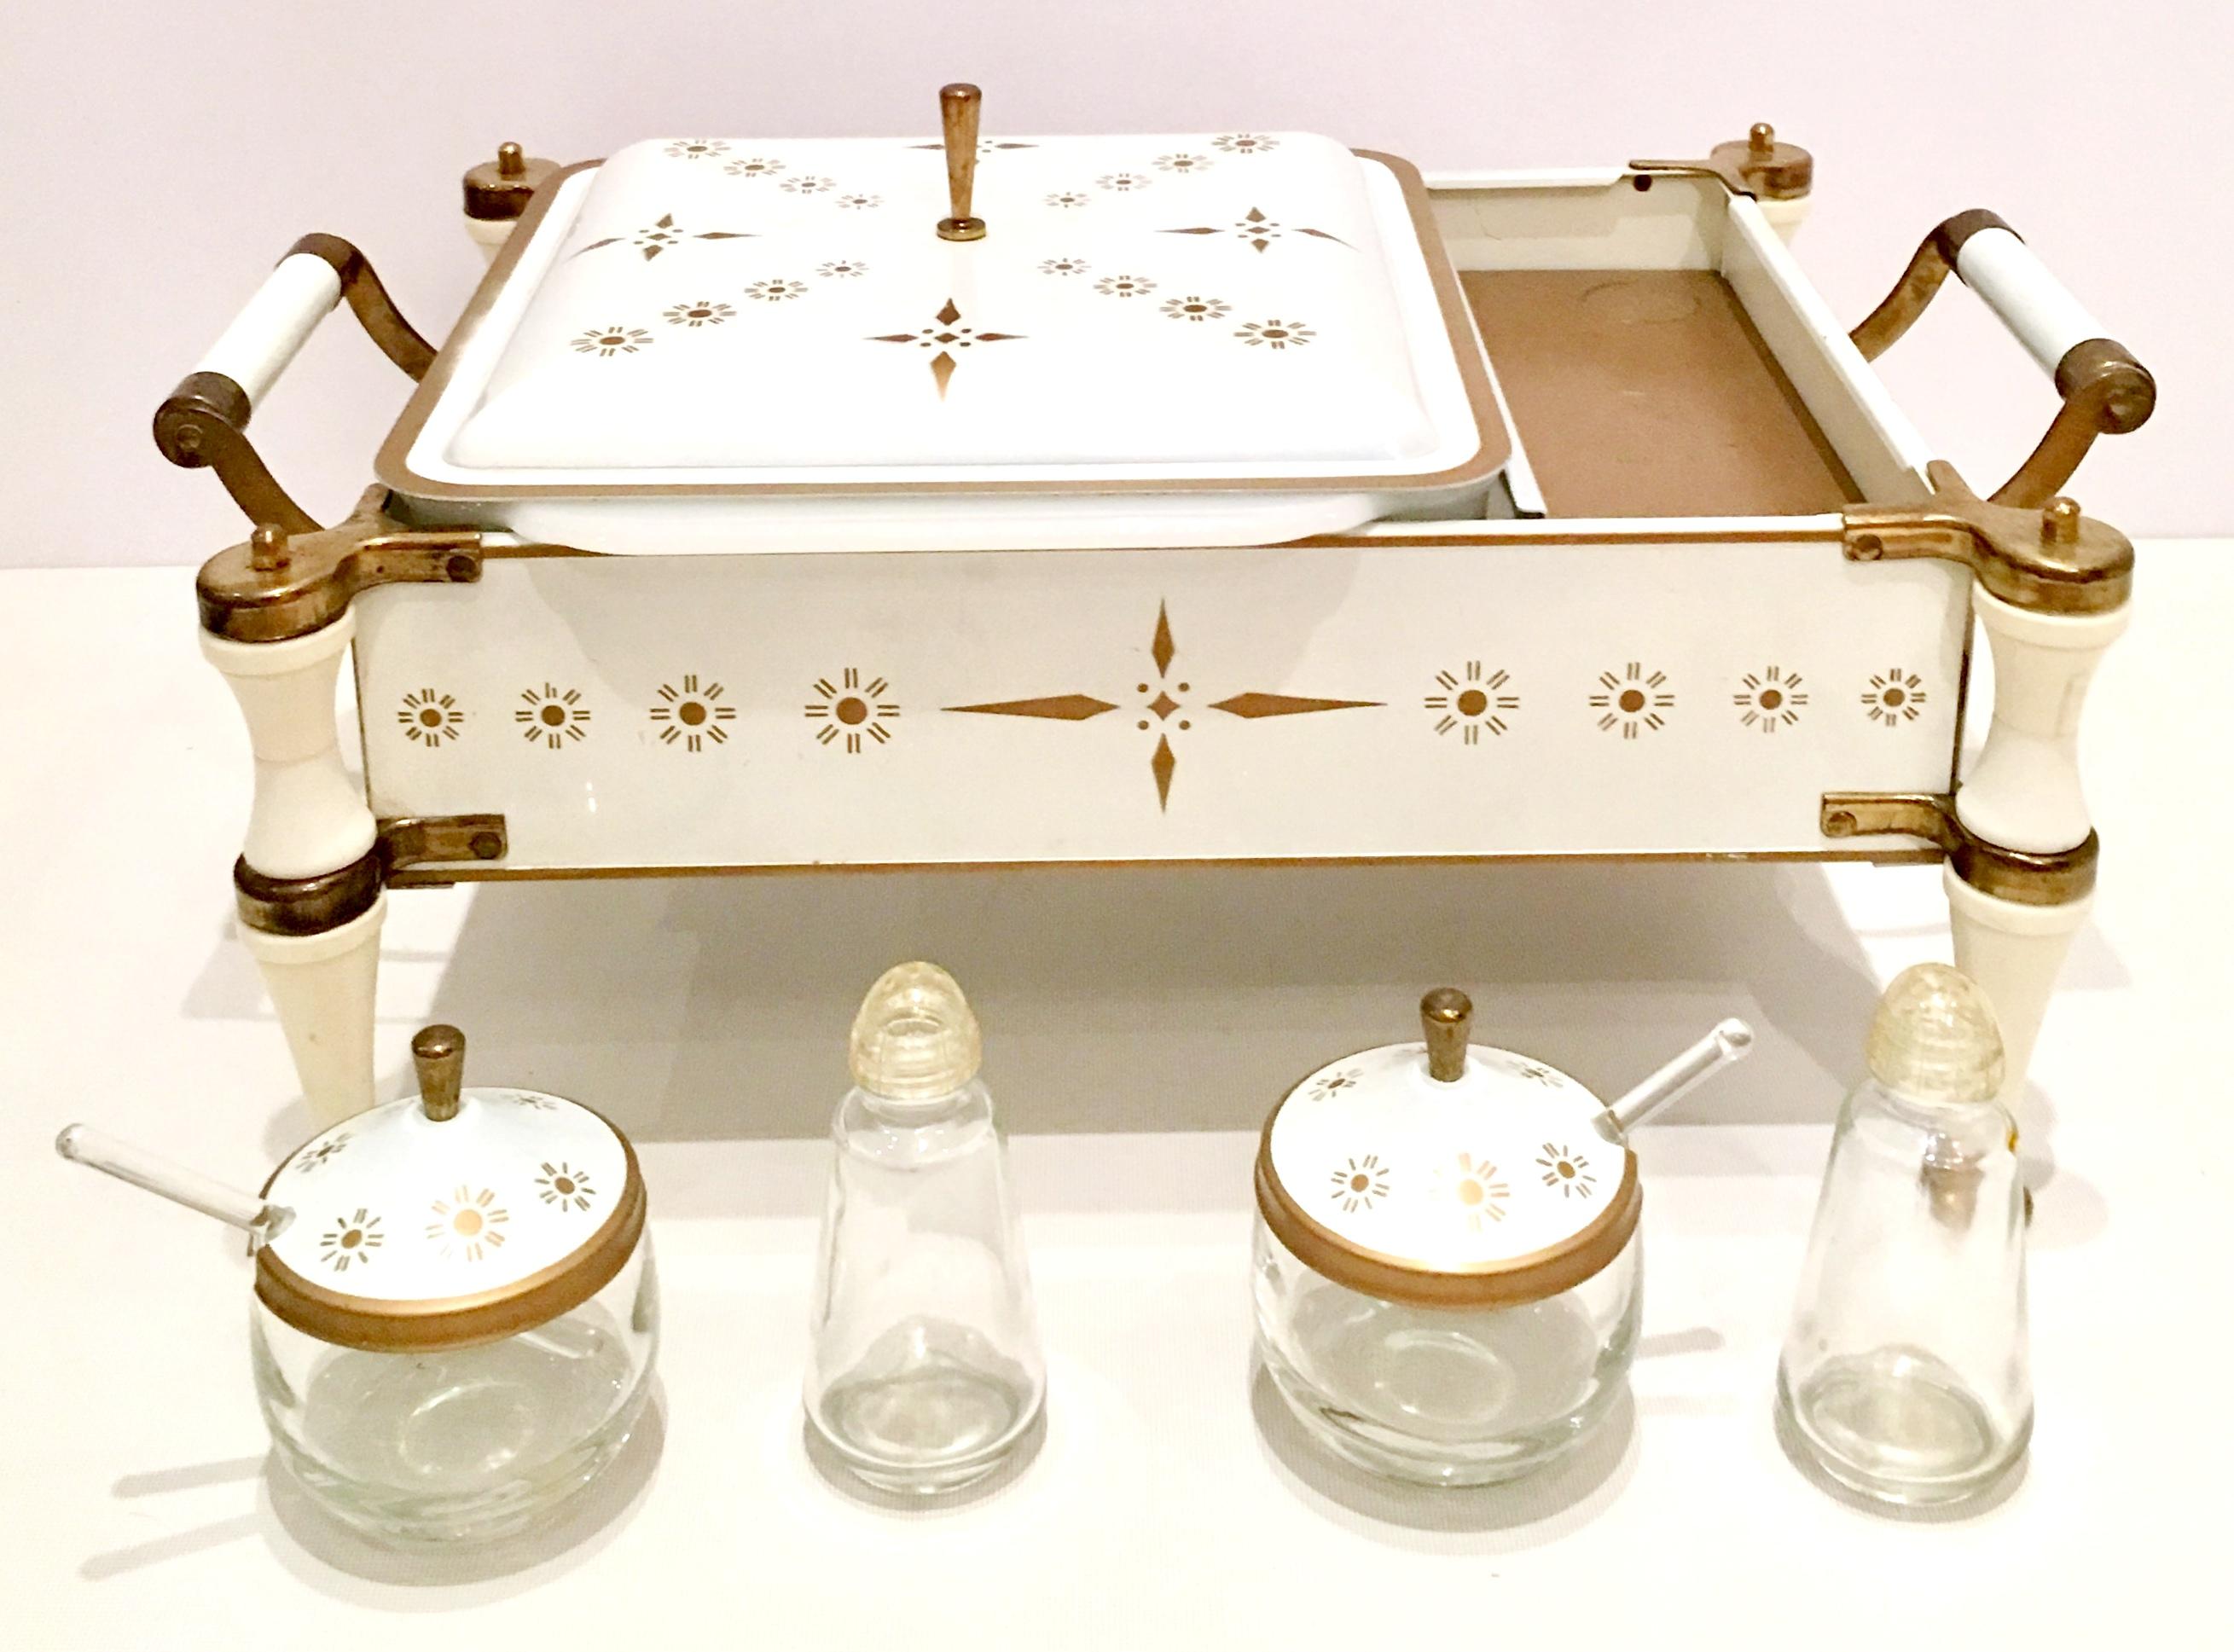 20th century enameled metal and brass chafing warming dish set of eleven pieces by, Fire King. For Anchor Hocking. Features a white and gold tone geometric enameled motif, with brass feet, handles and lid knobs.
Set includes, 1 opaque white Pyrex